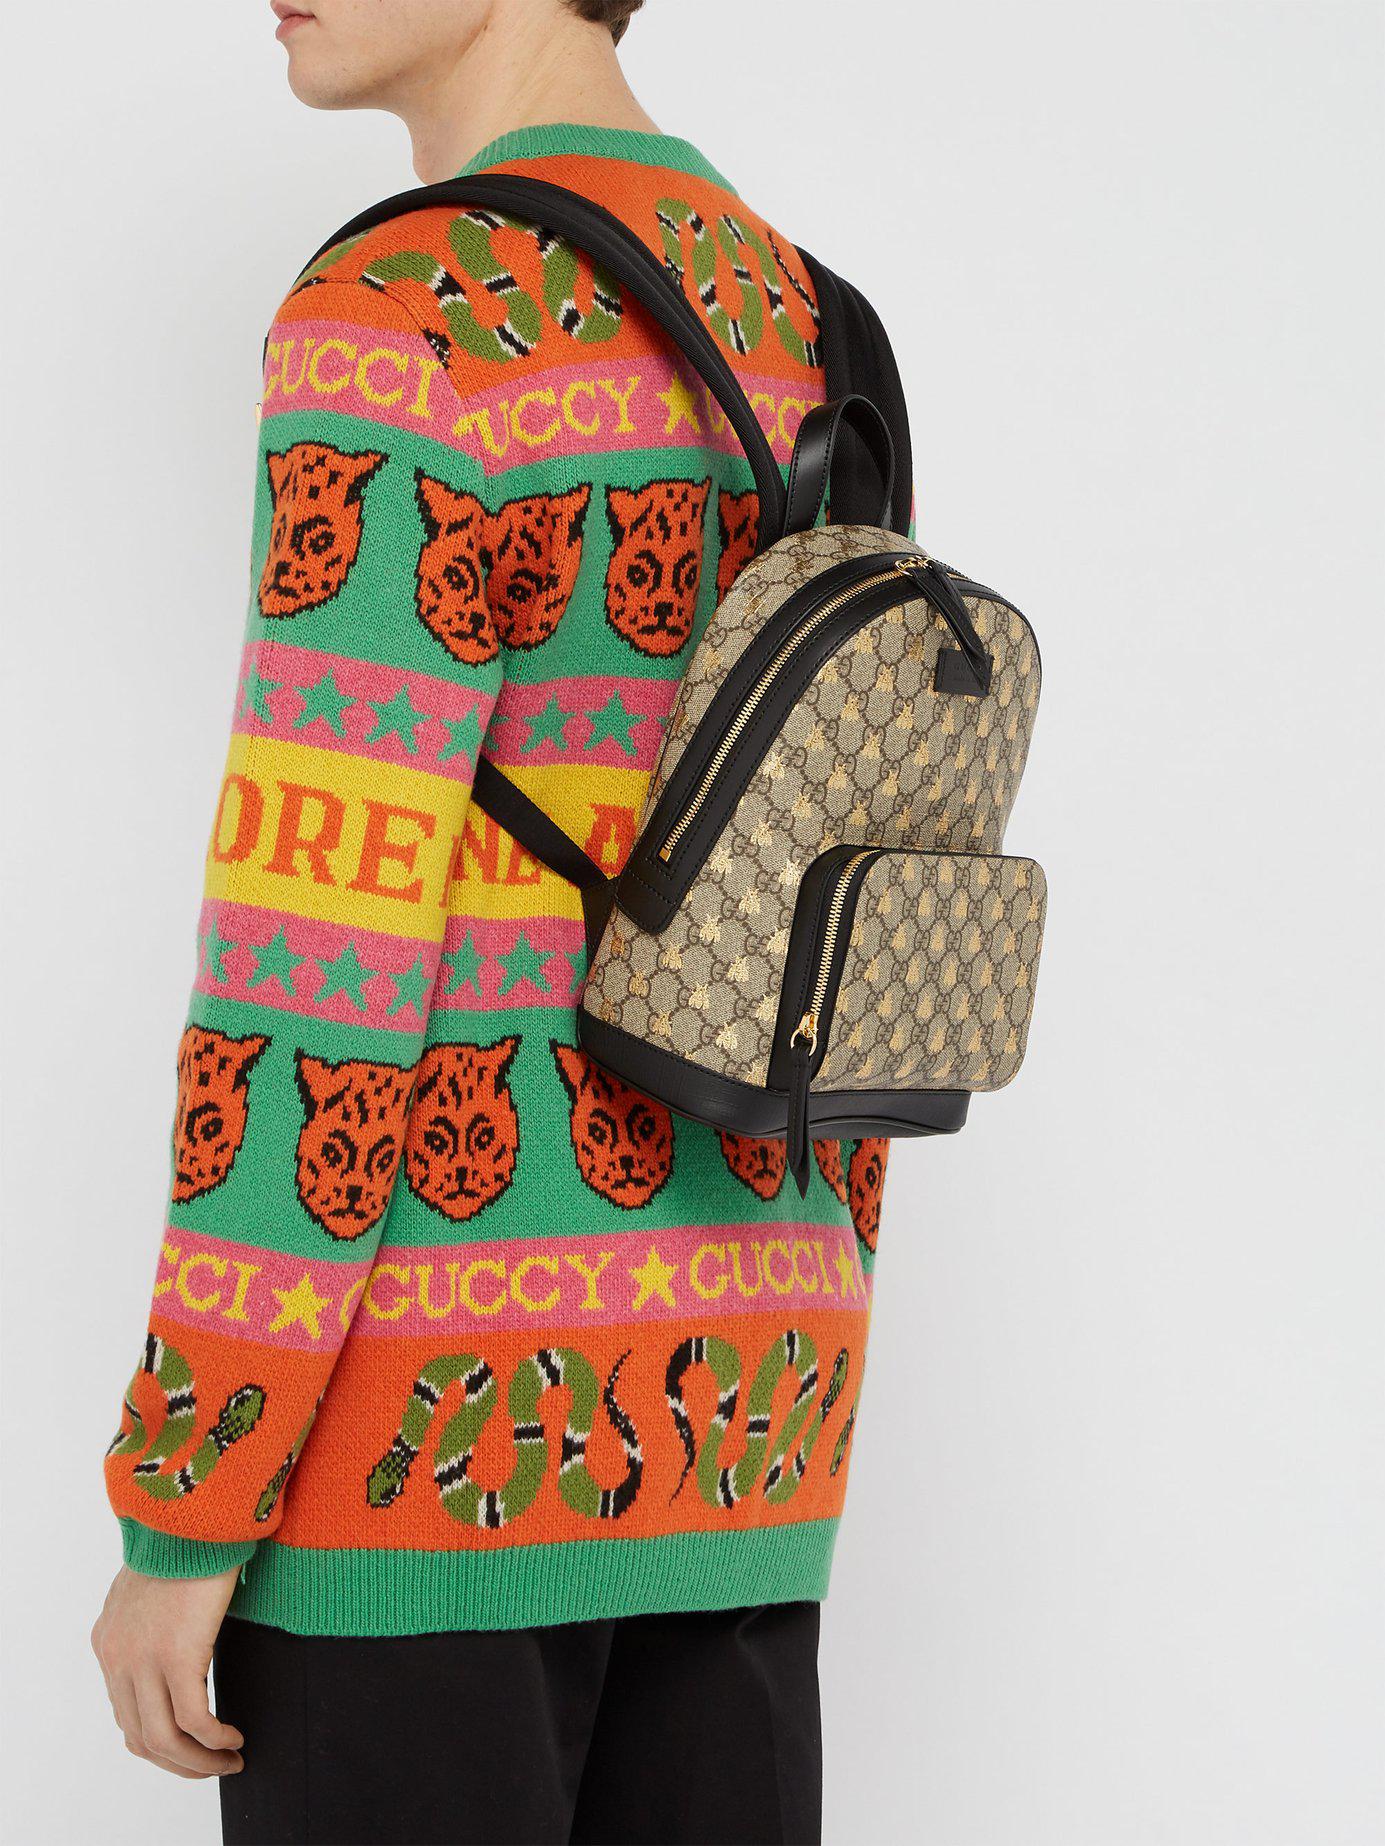 gucci backpack outfit